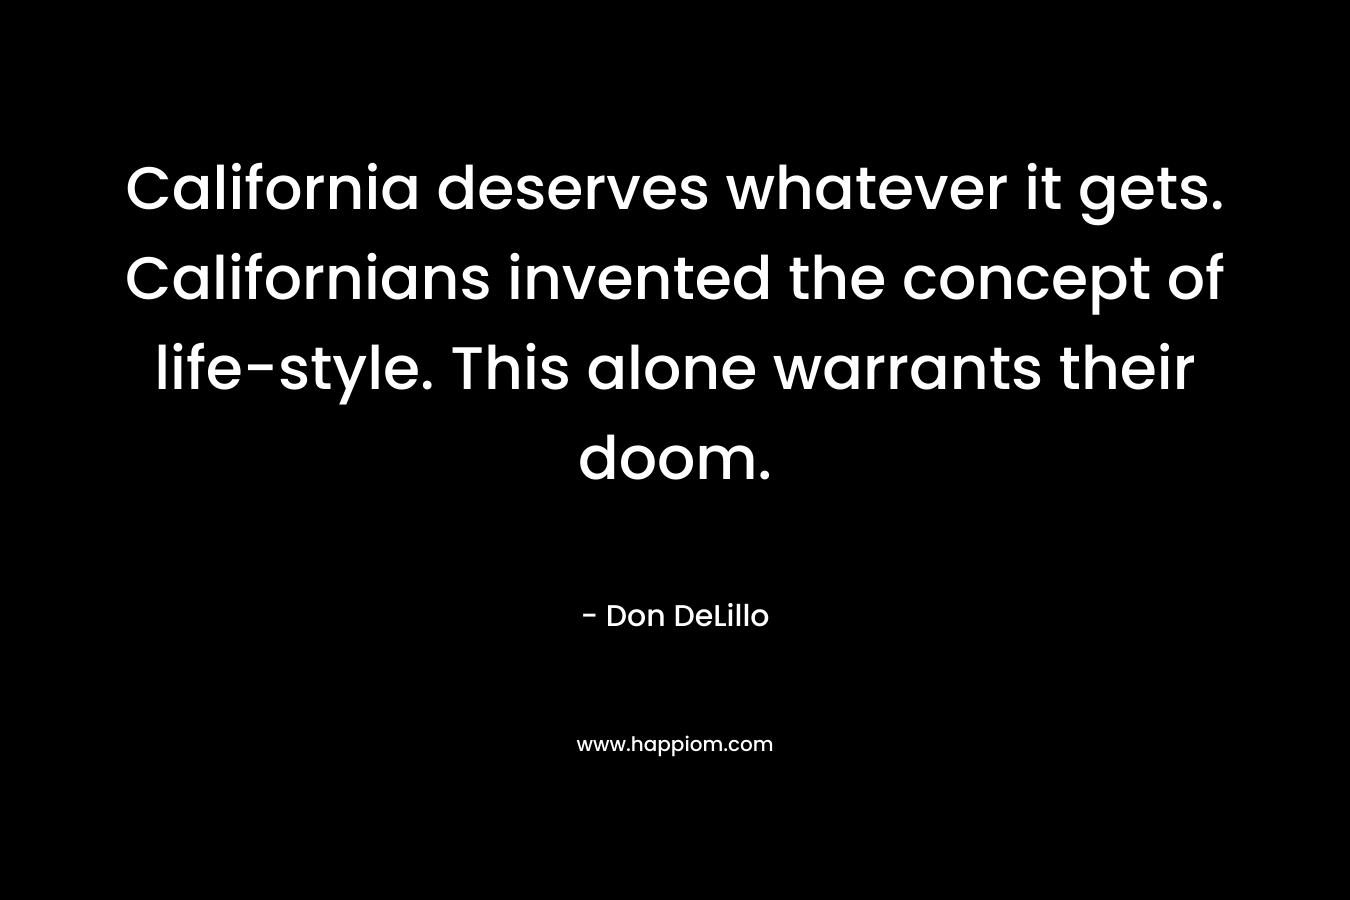 California deserves whatever it gets. Californians invented the concept of life-style. This alone warrants their doom.